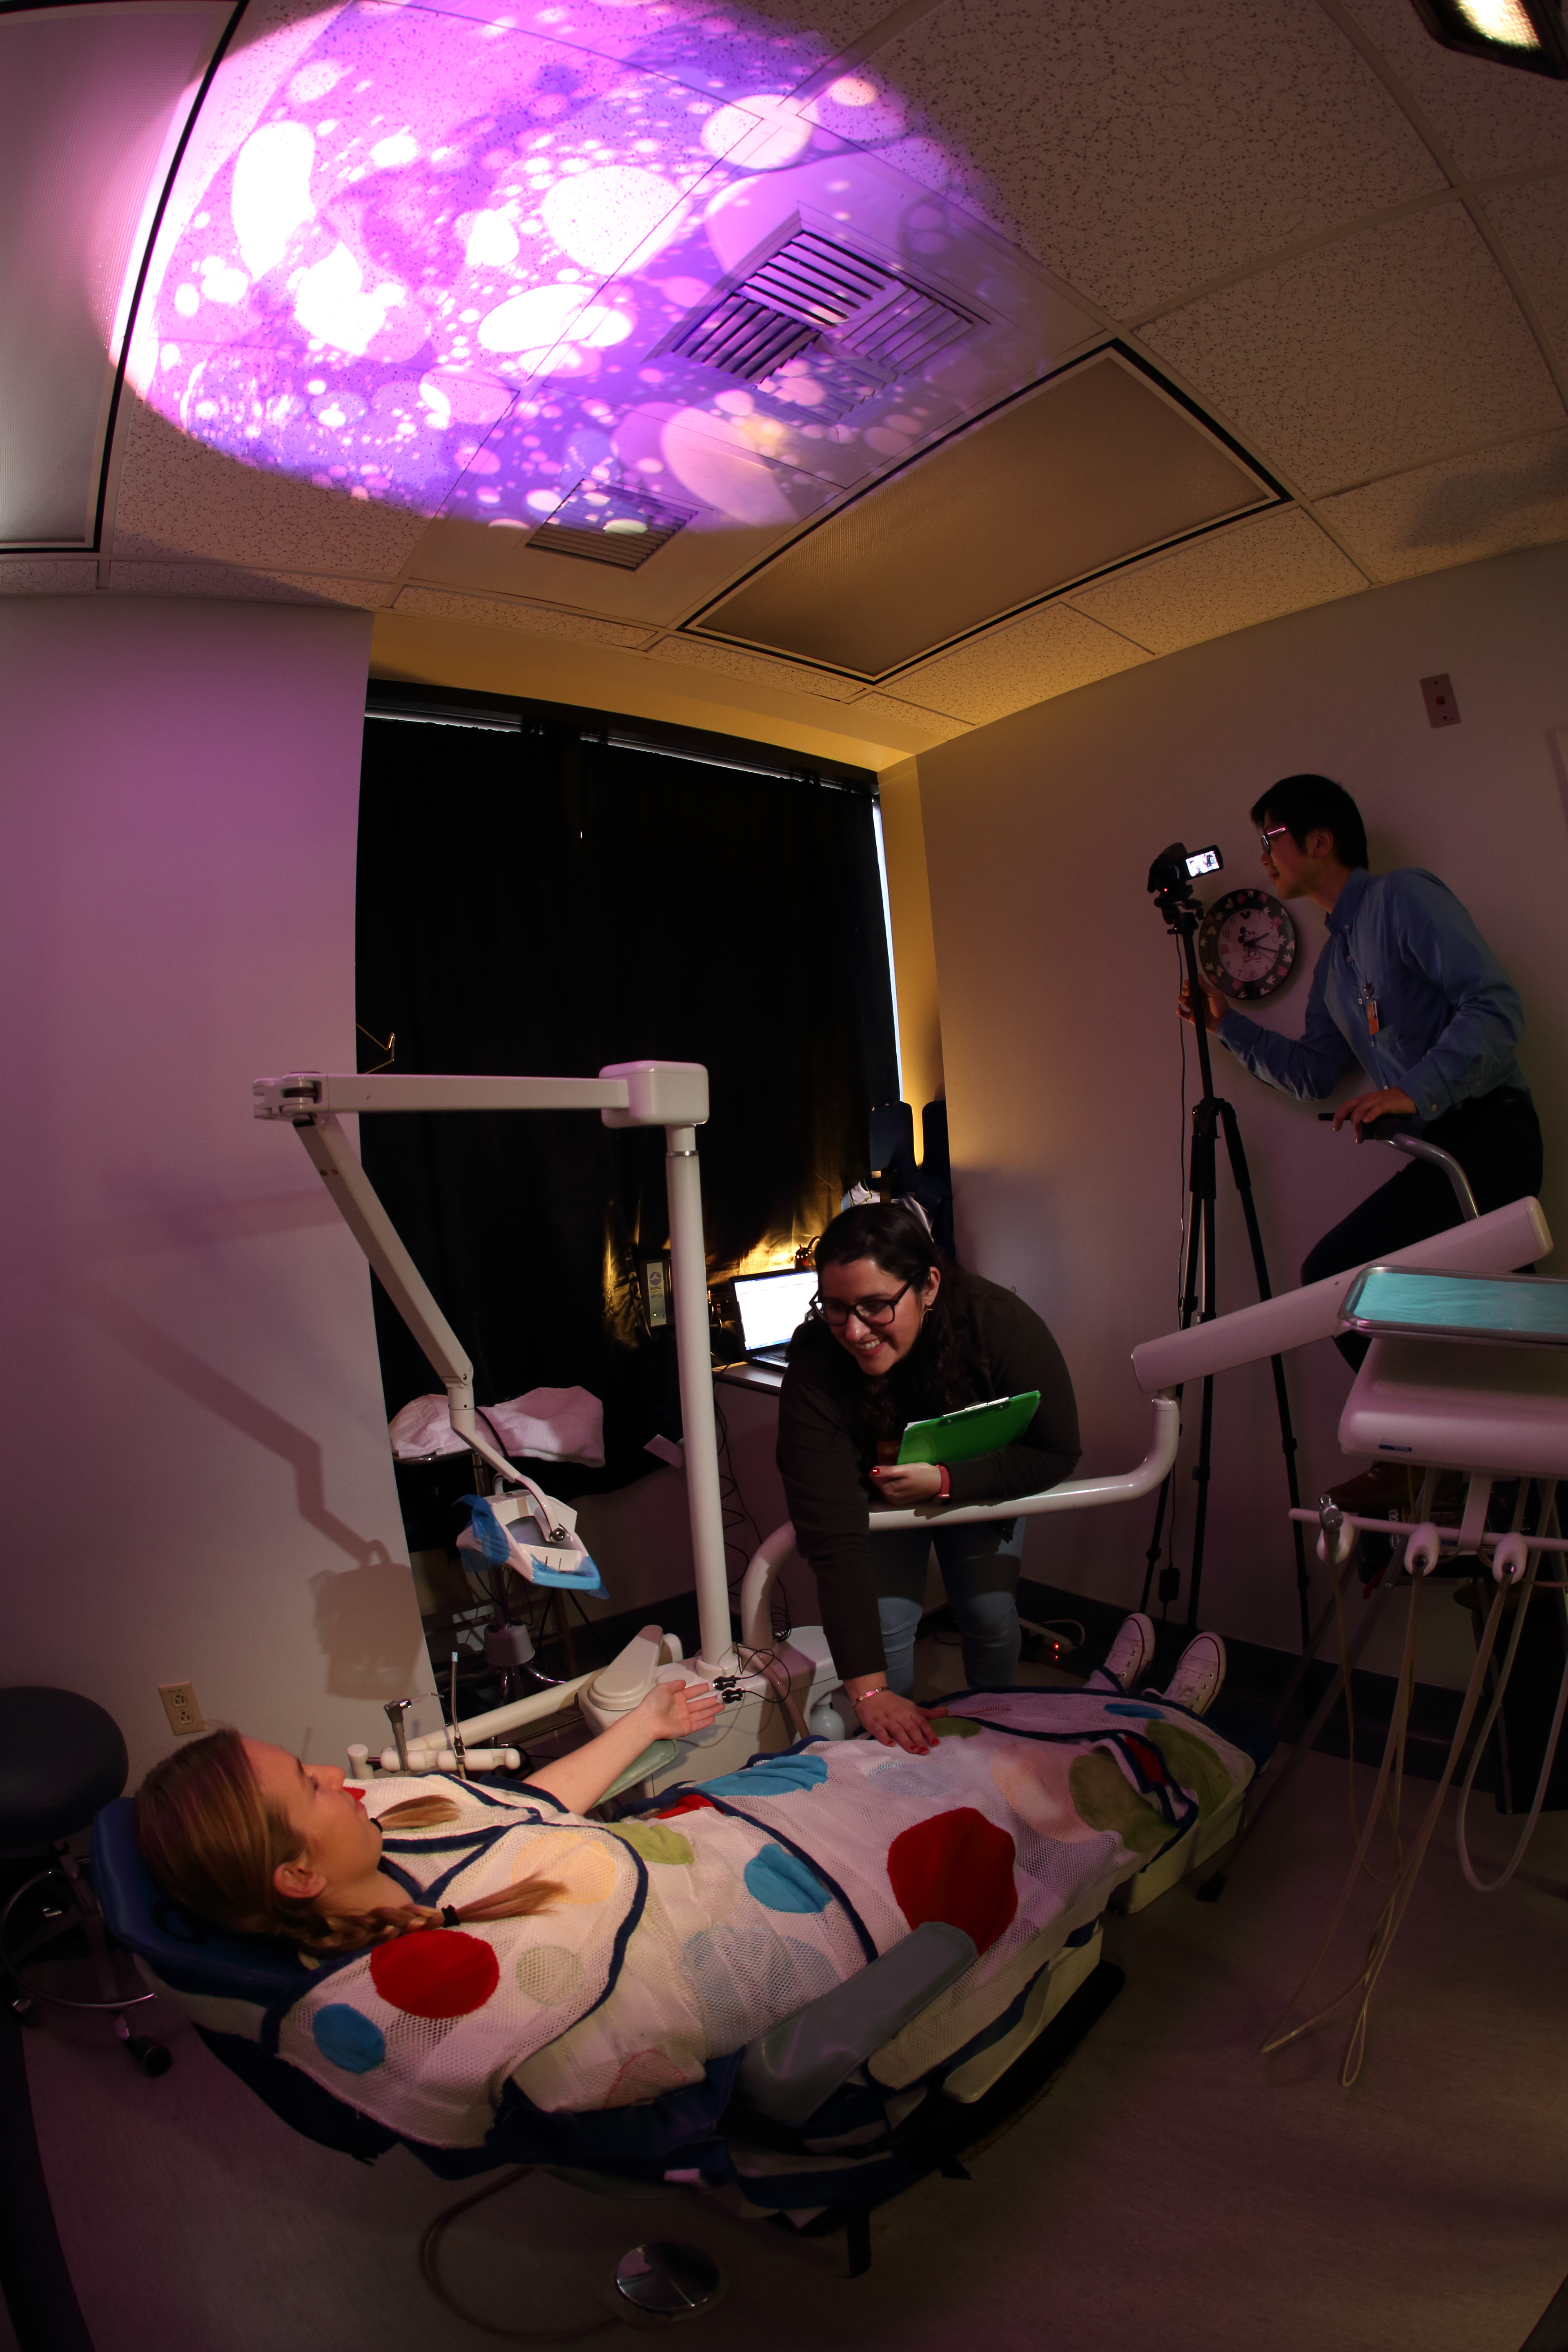 Scientists developed a sensory adapted dental environment that featured dim lights, a weighted wrap, calm music, and image projections on the ceiling for children with autism spectrum disorders. | Phil Channing/USC